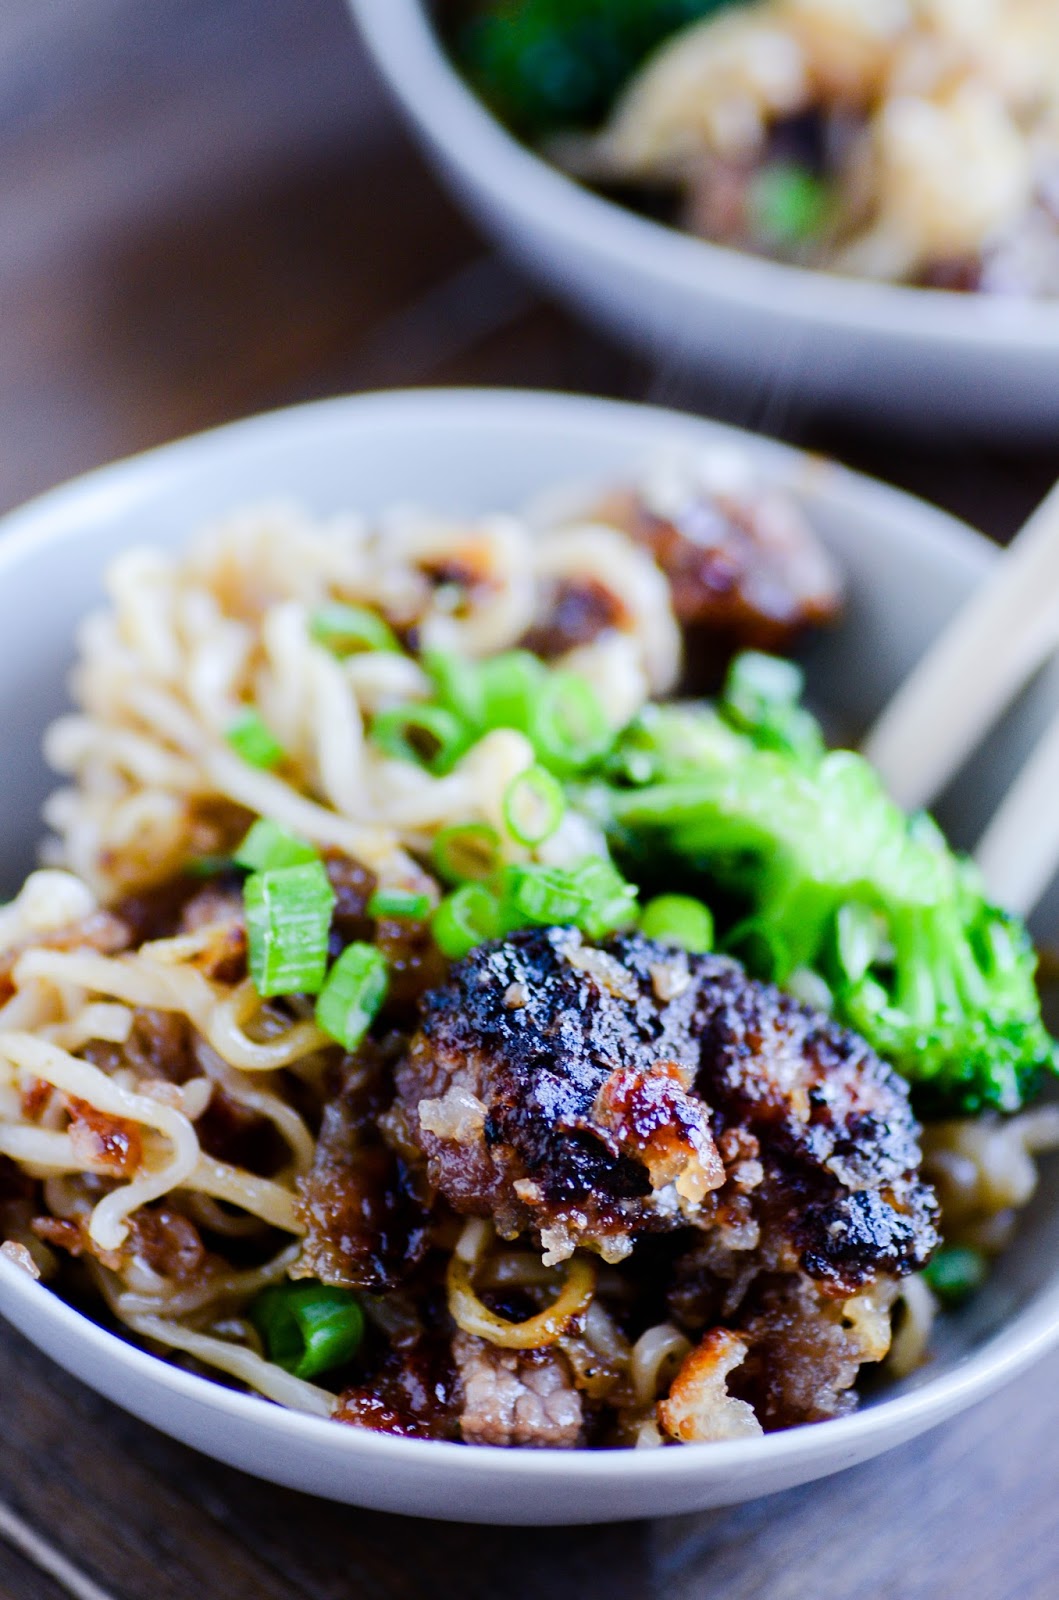 This recipe is the bomb.com. I've never been a beef and broccoli fan, but one bite of this completely changed my mind. A little sweet, a lot of flavor, and one perfect better-than-takeout family dinner.